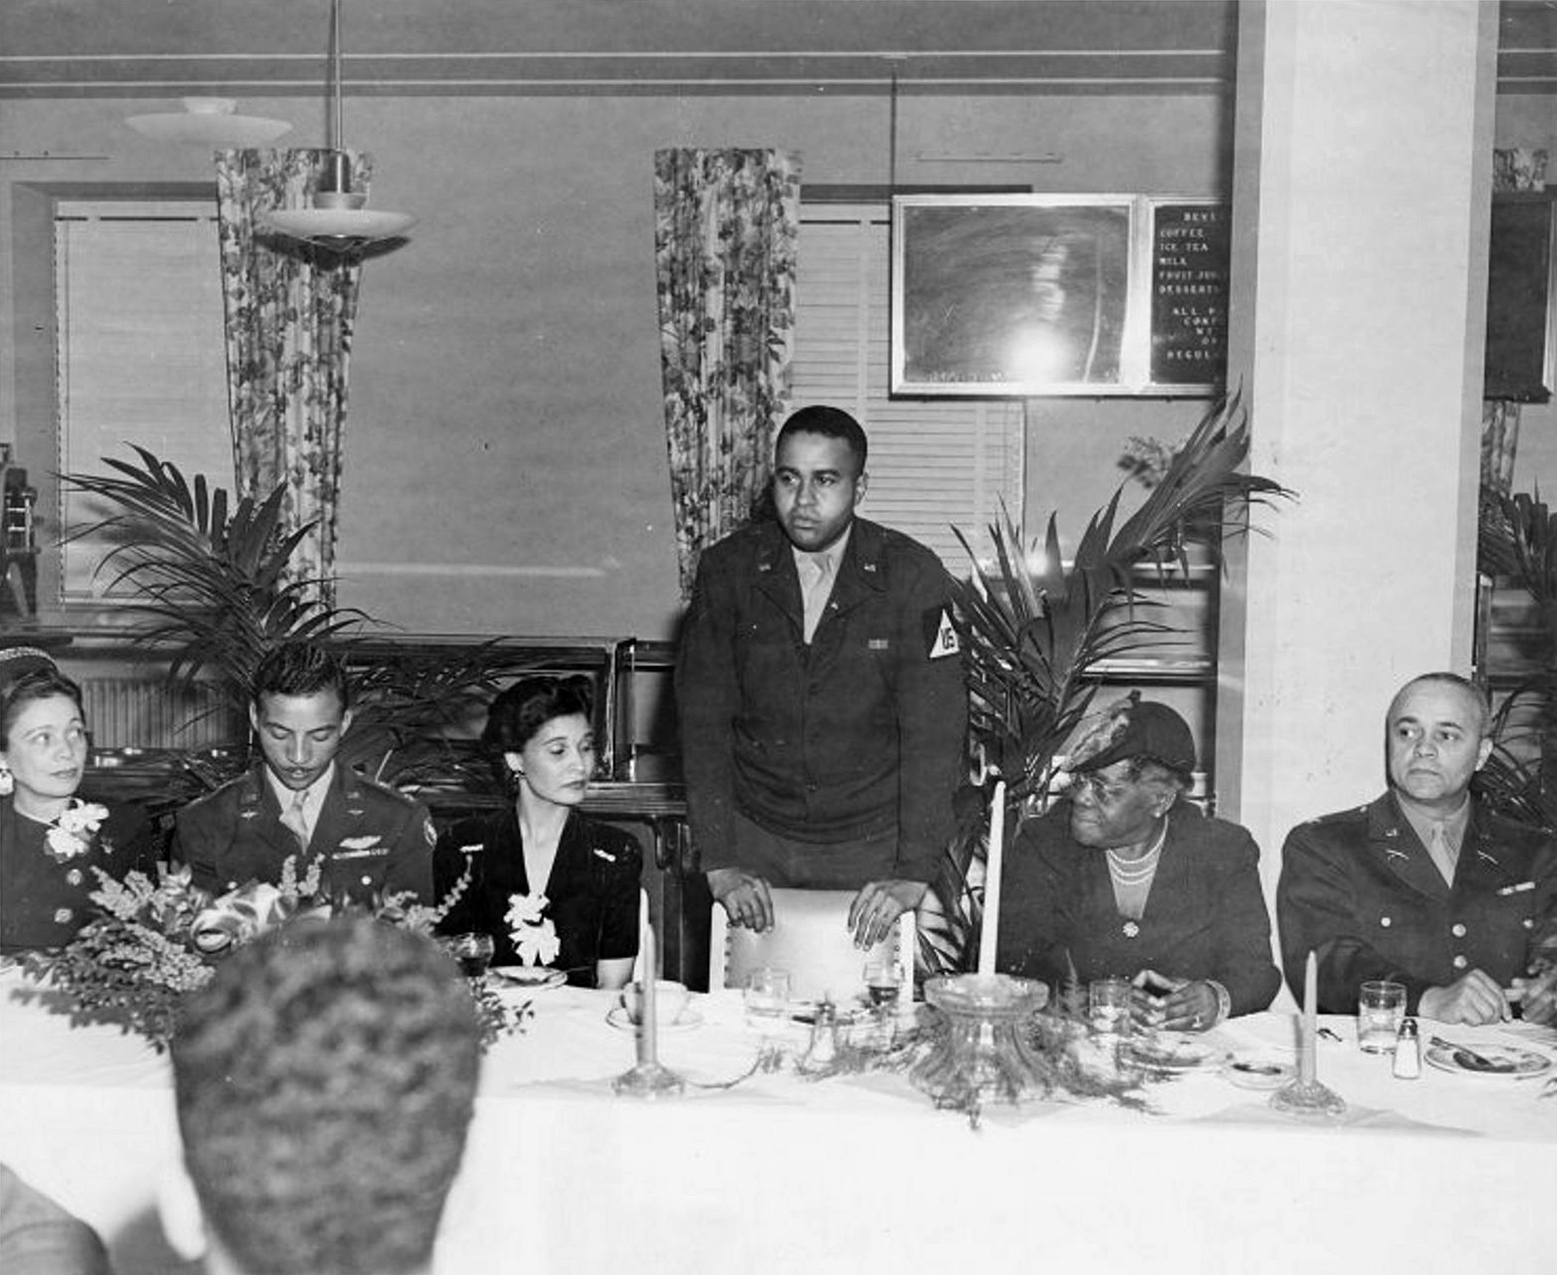 Moss leaning on a chair while speaking as five seated attendees listen